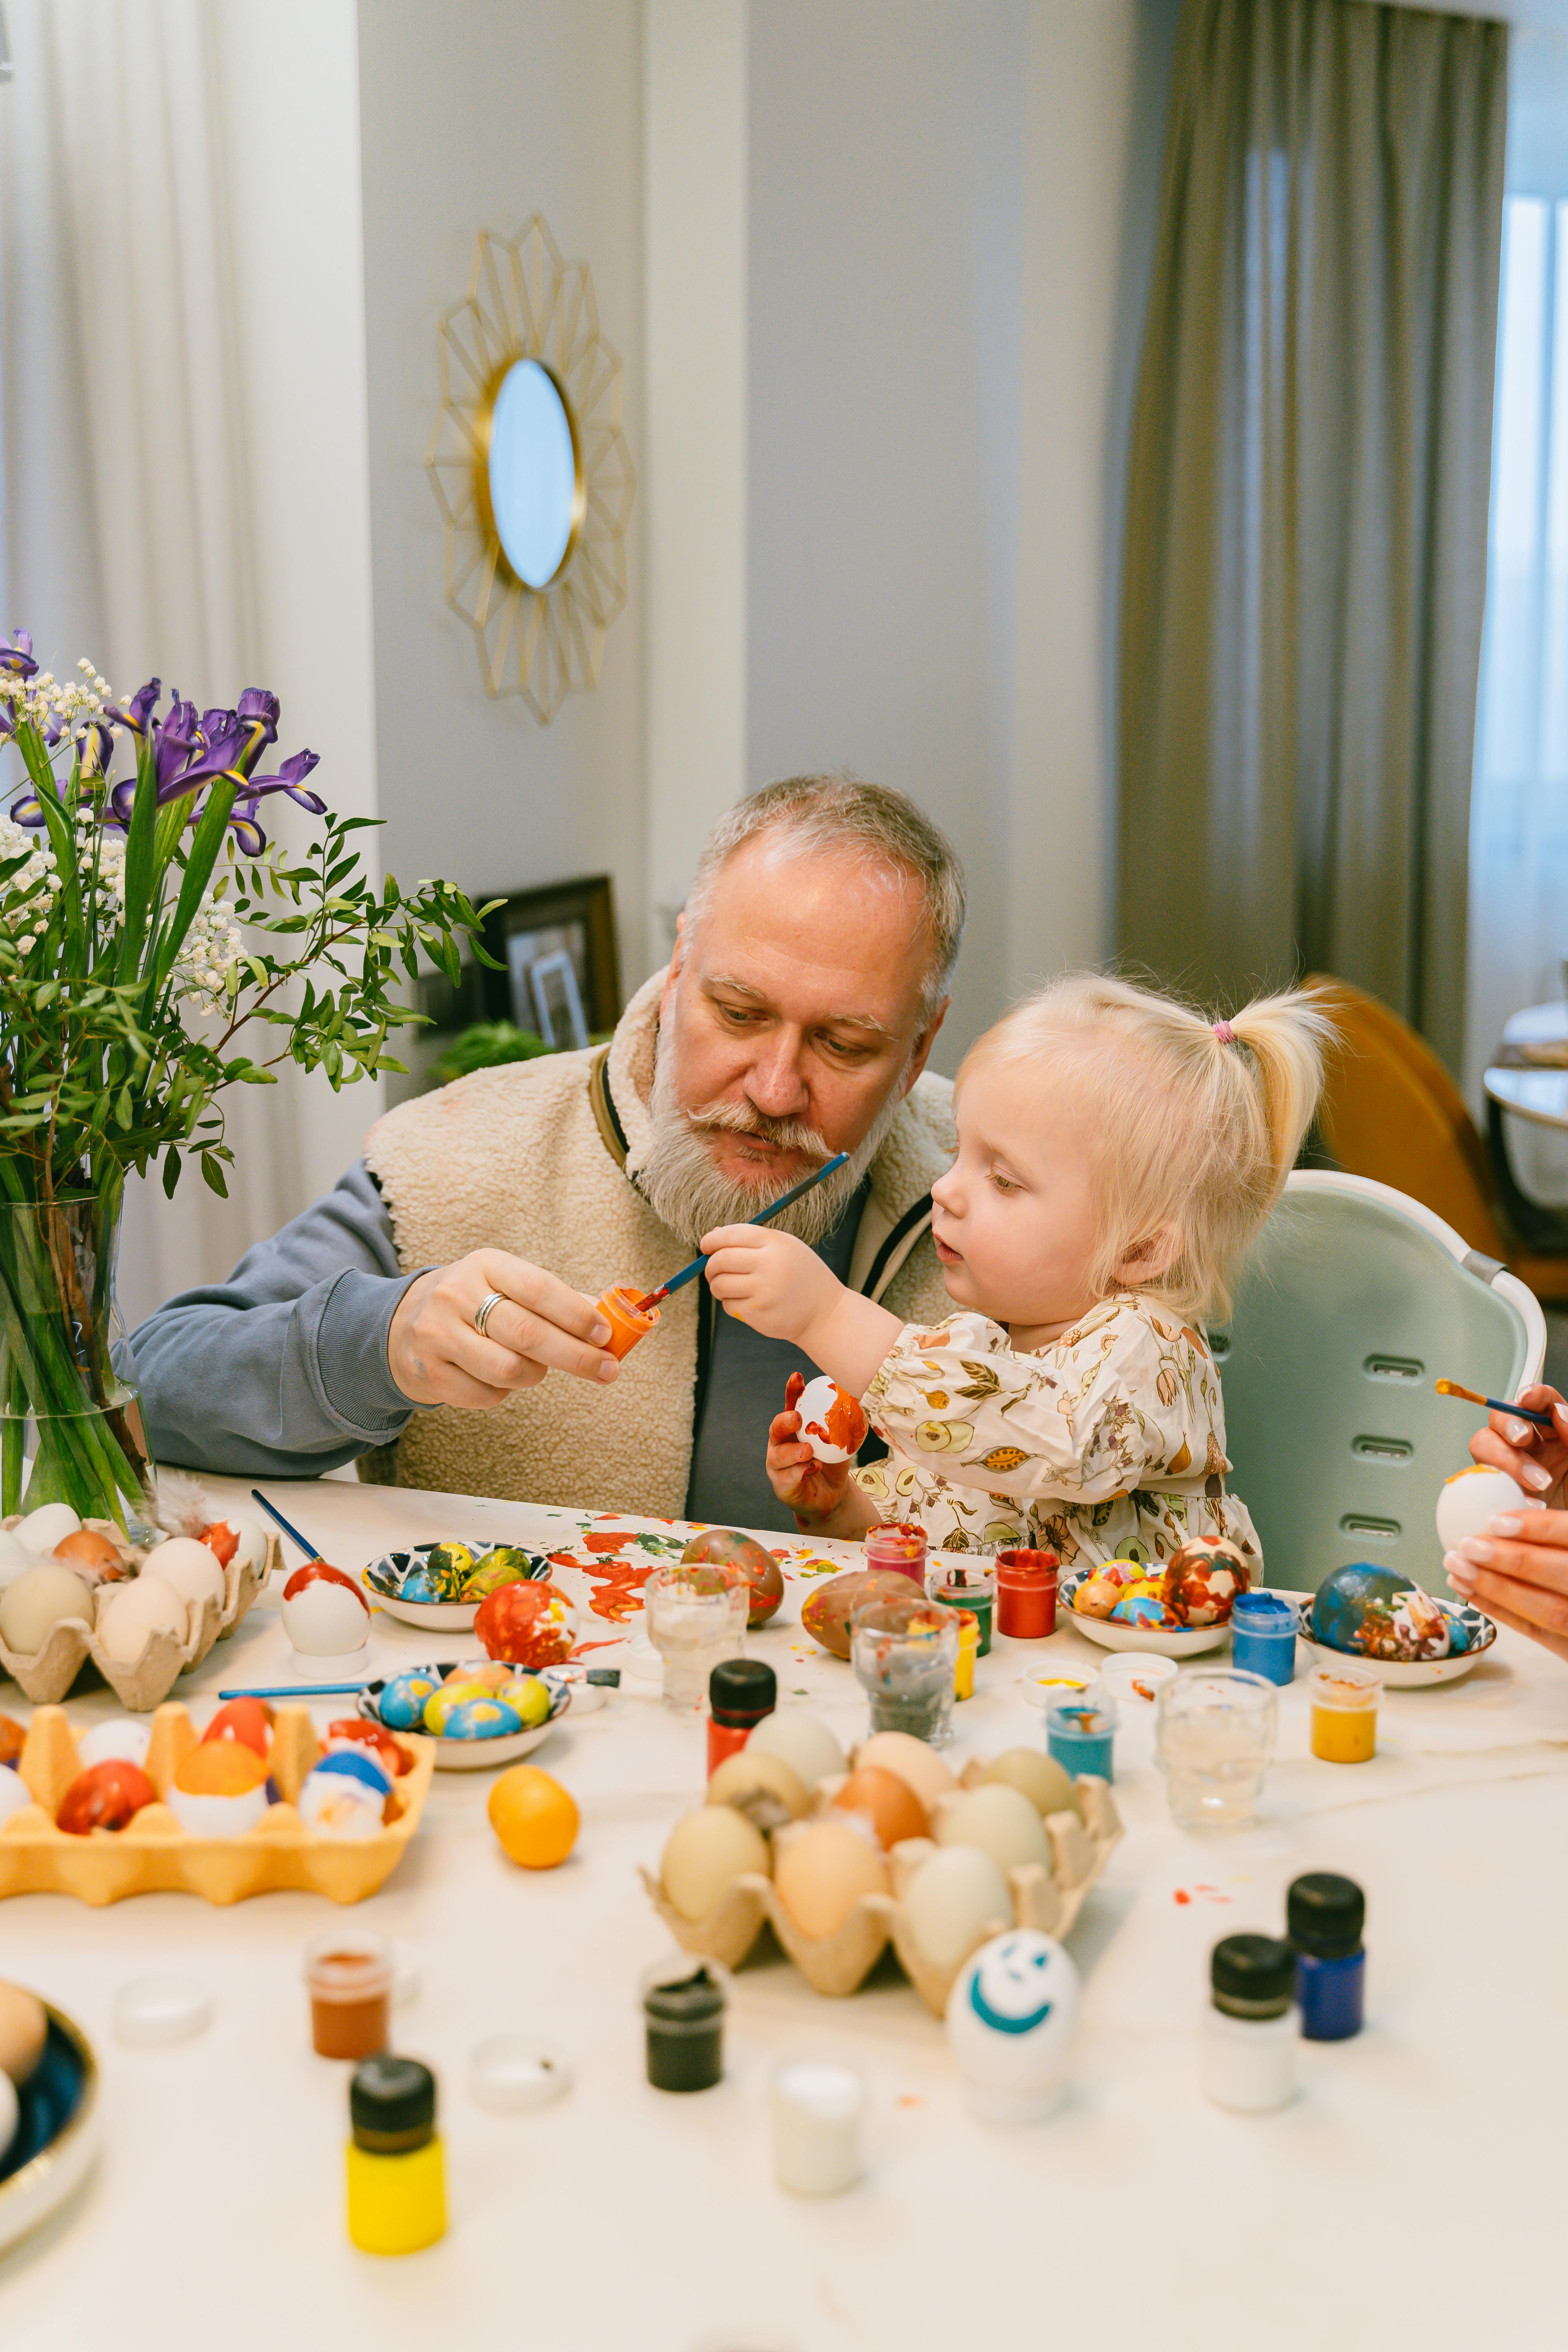 A grandfather playing with his granddaughter | Source: Pexels